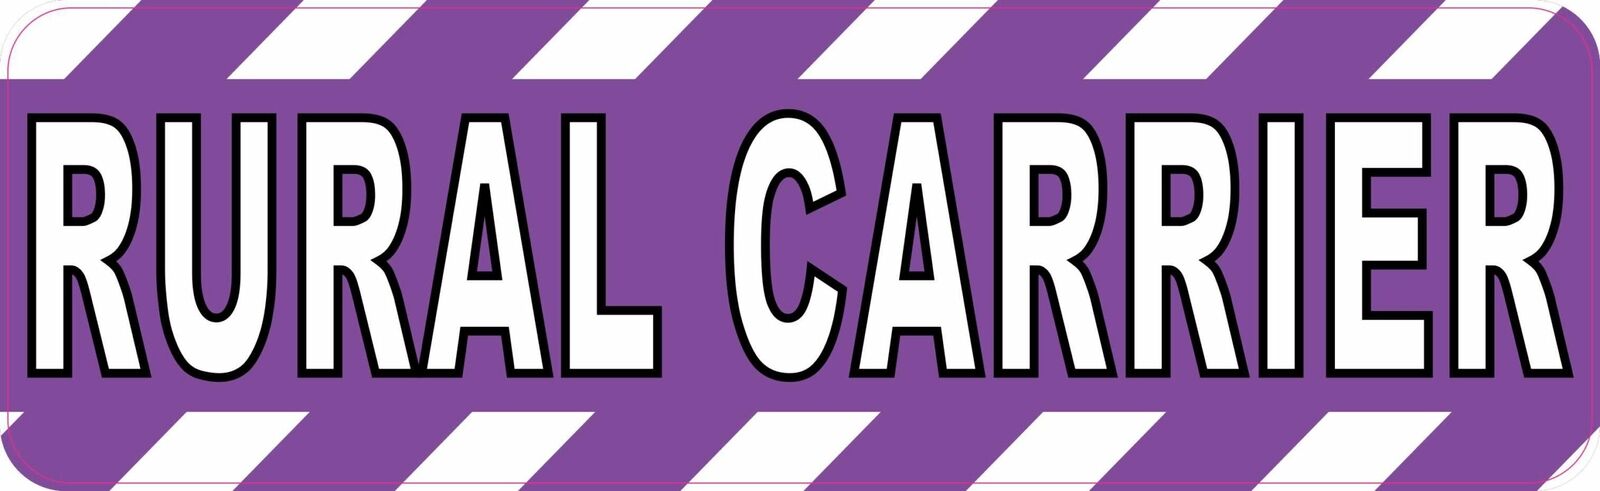 10in x 3in Purple Rural Carrier Magnet Car Truck Vehicle Magnetic Sign